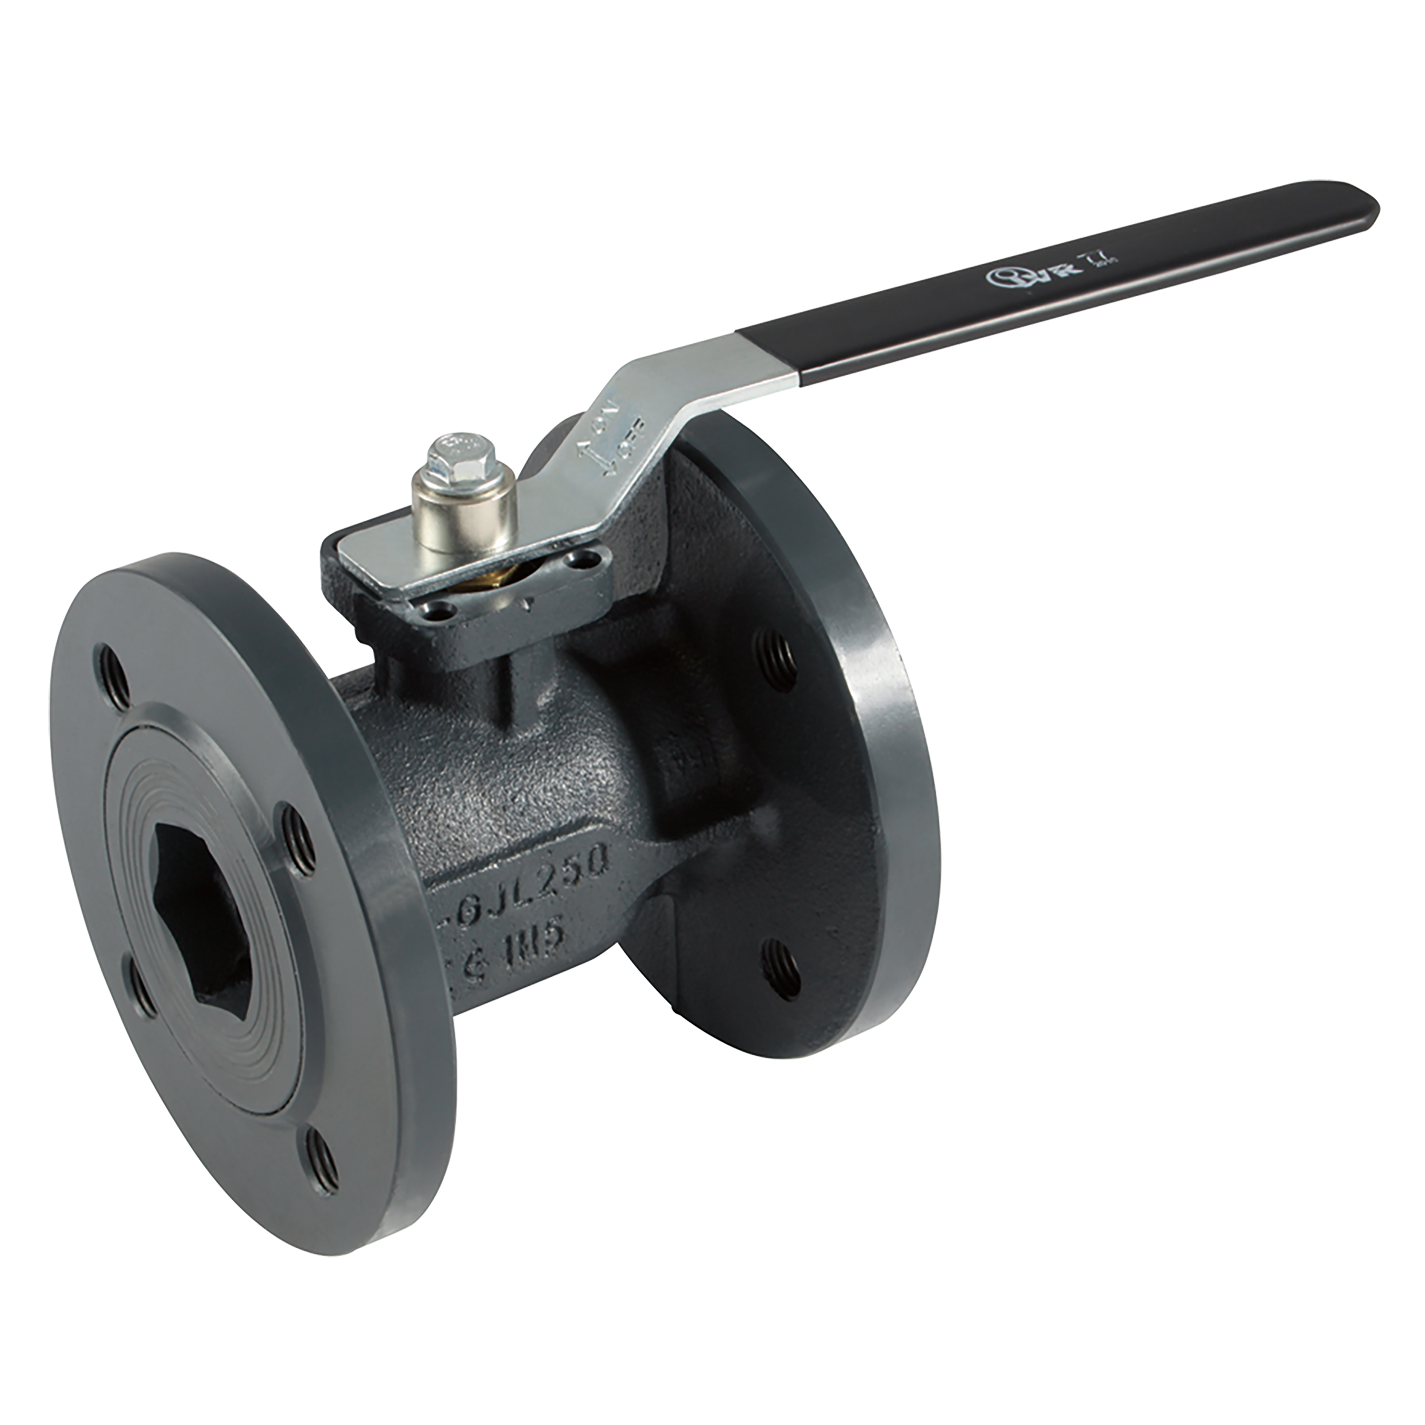 6"BSPCIBall Valves Flanged ISO5211 PN16